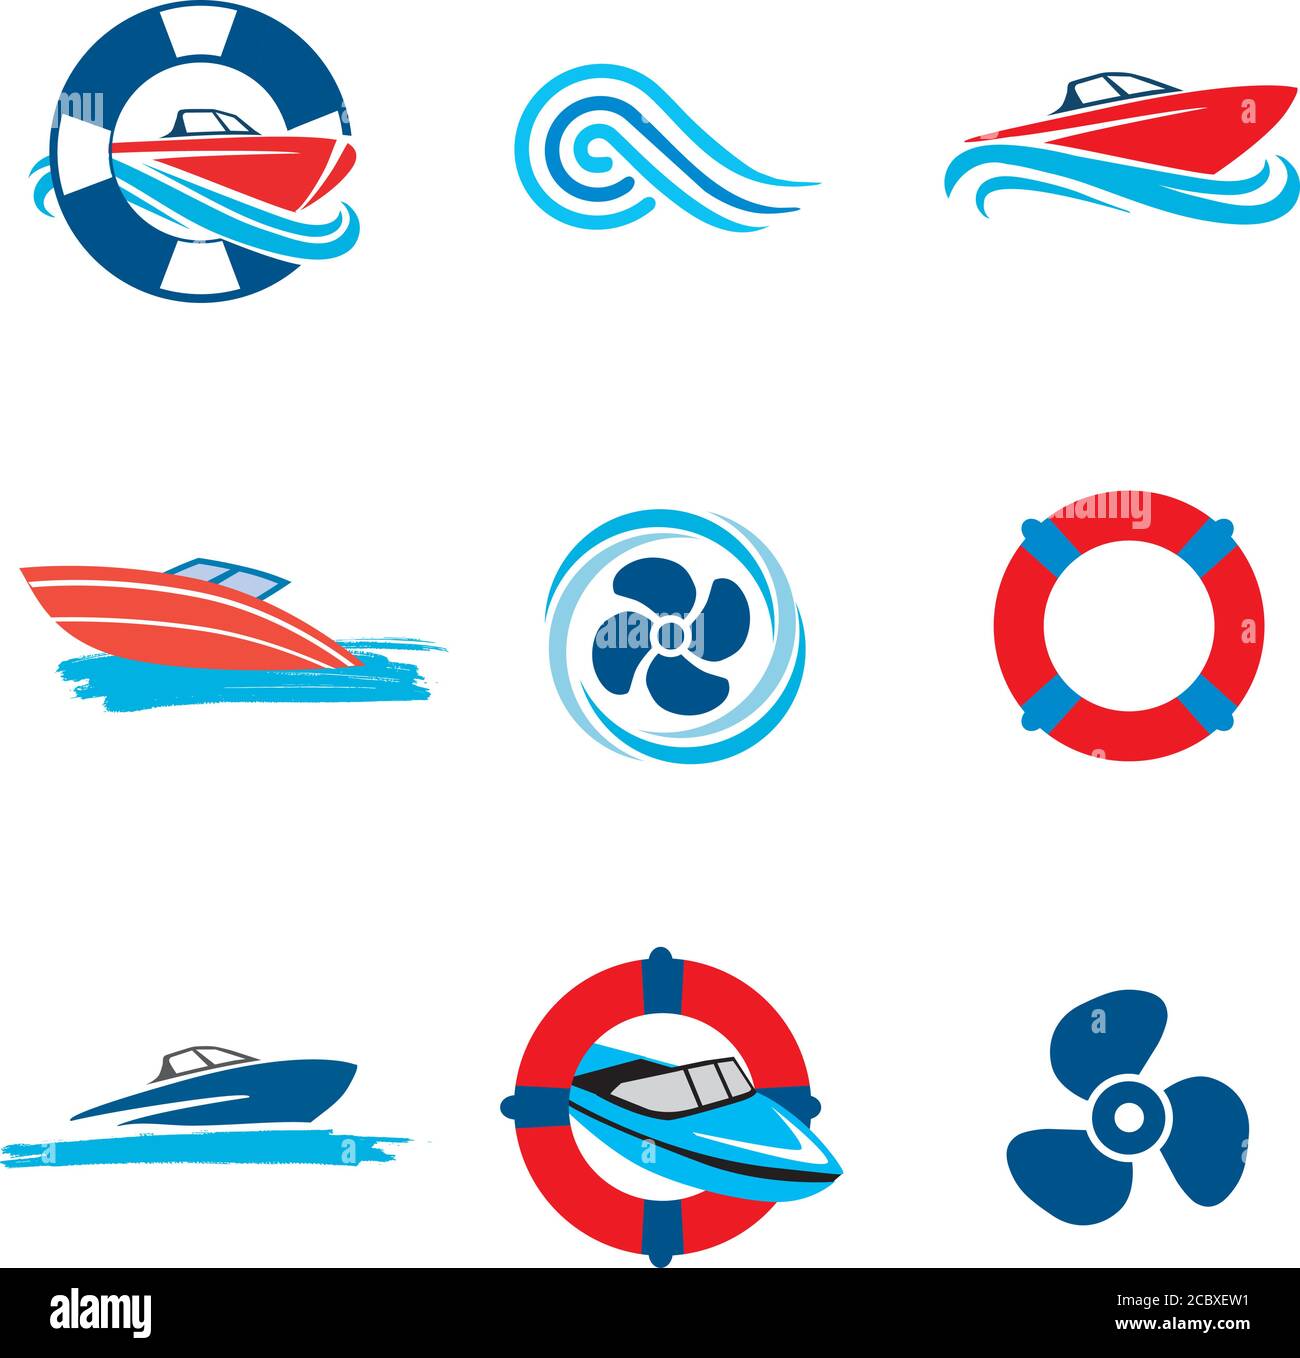 Motor Boat icons set. Set of colorful icons with Motor Boats and propellers. Vector available. Stock Vector